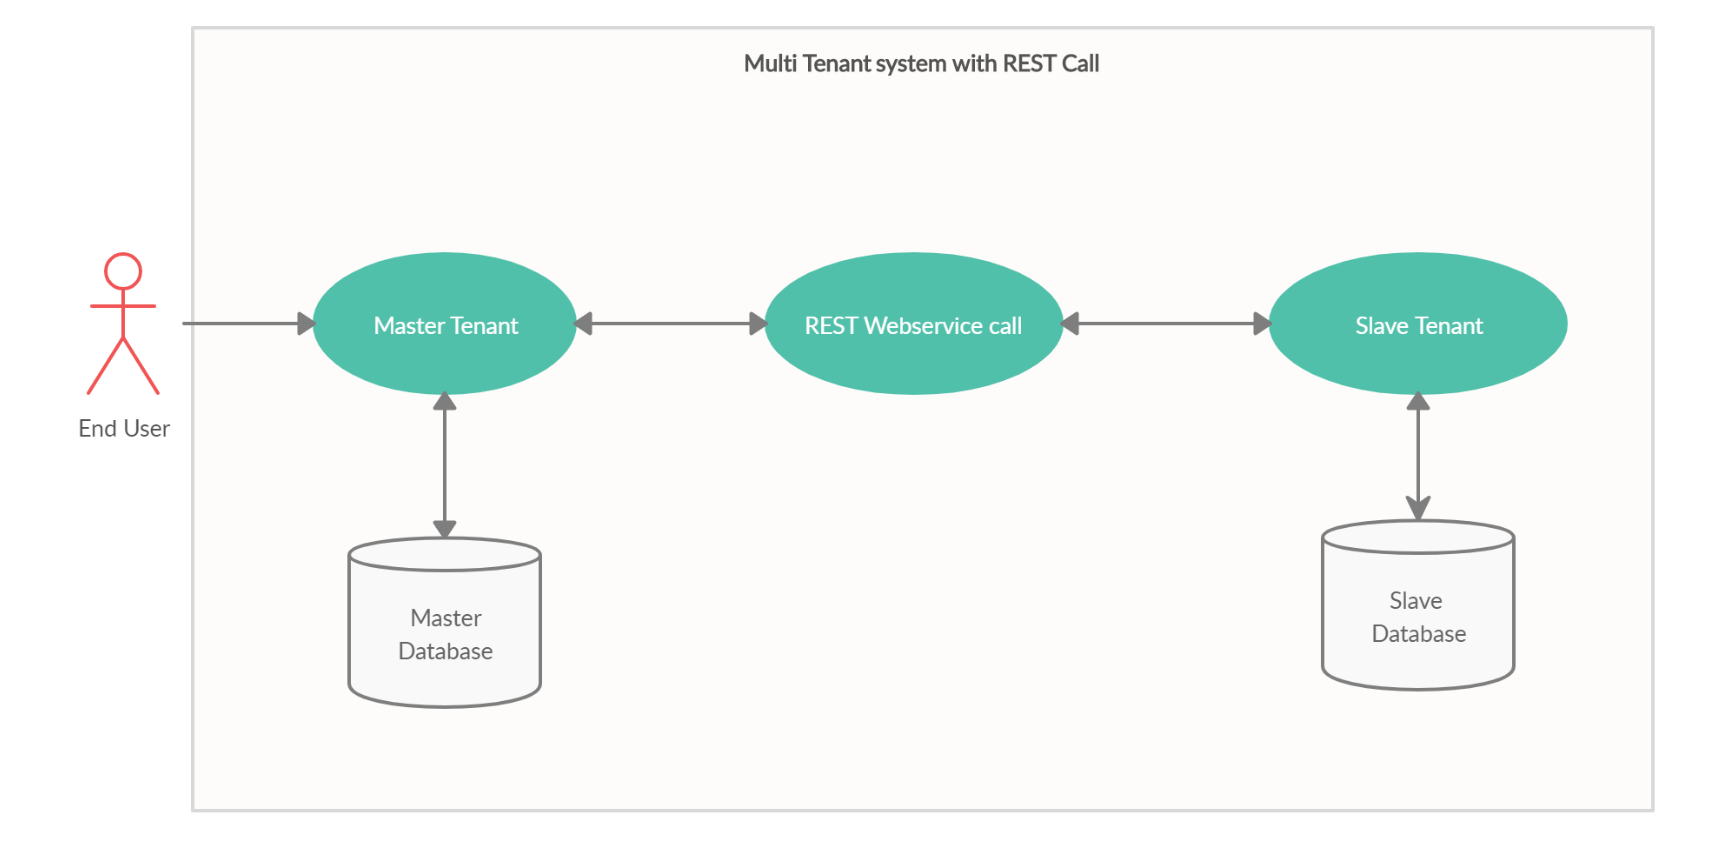 Multi tenant with REST call